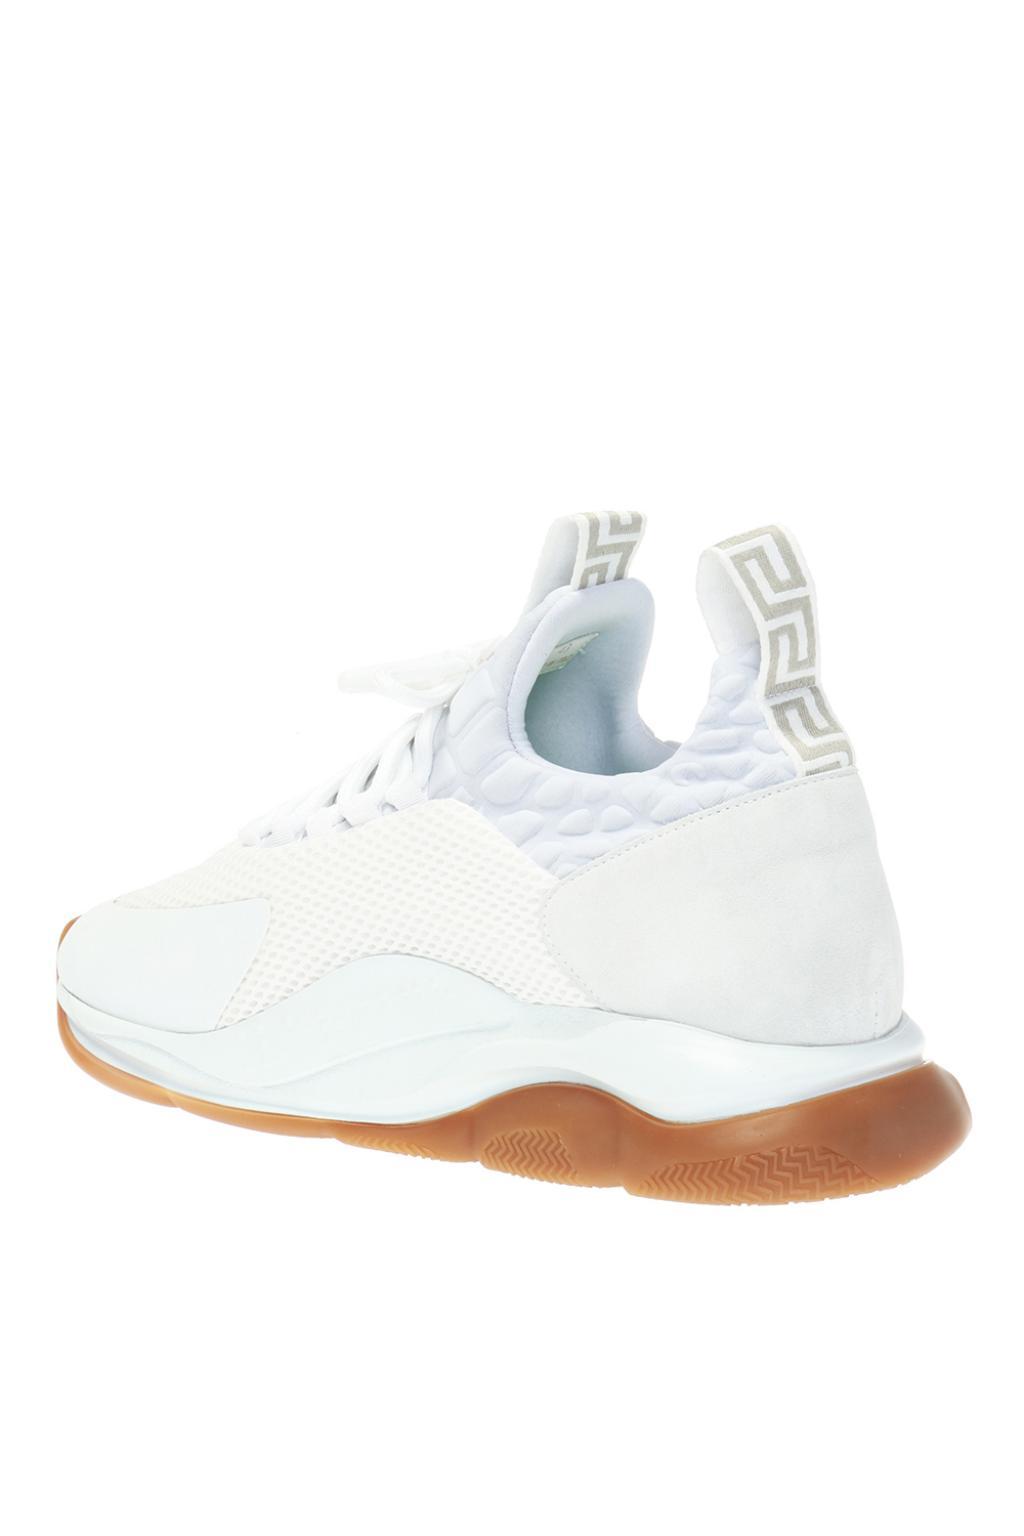 Versace Rubber X Chain Reaction in White for Men - Lyst